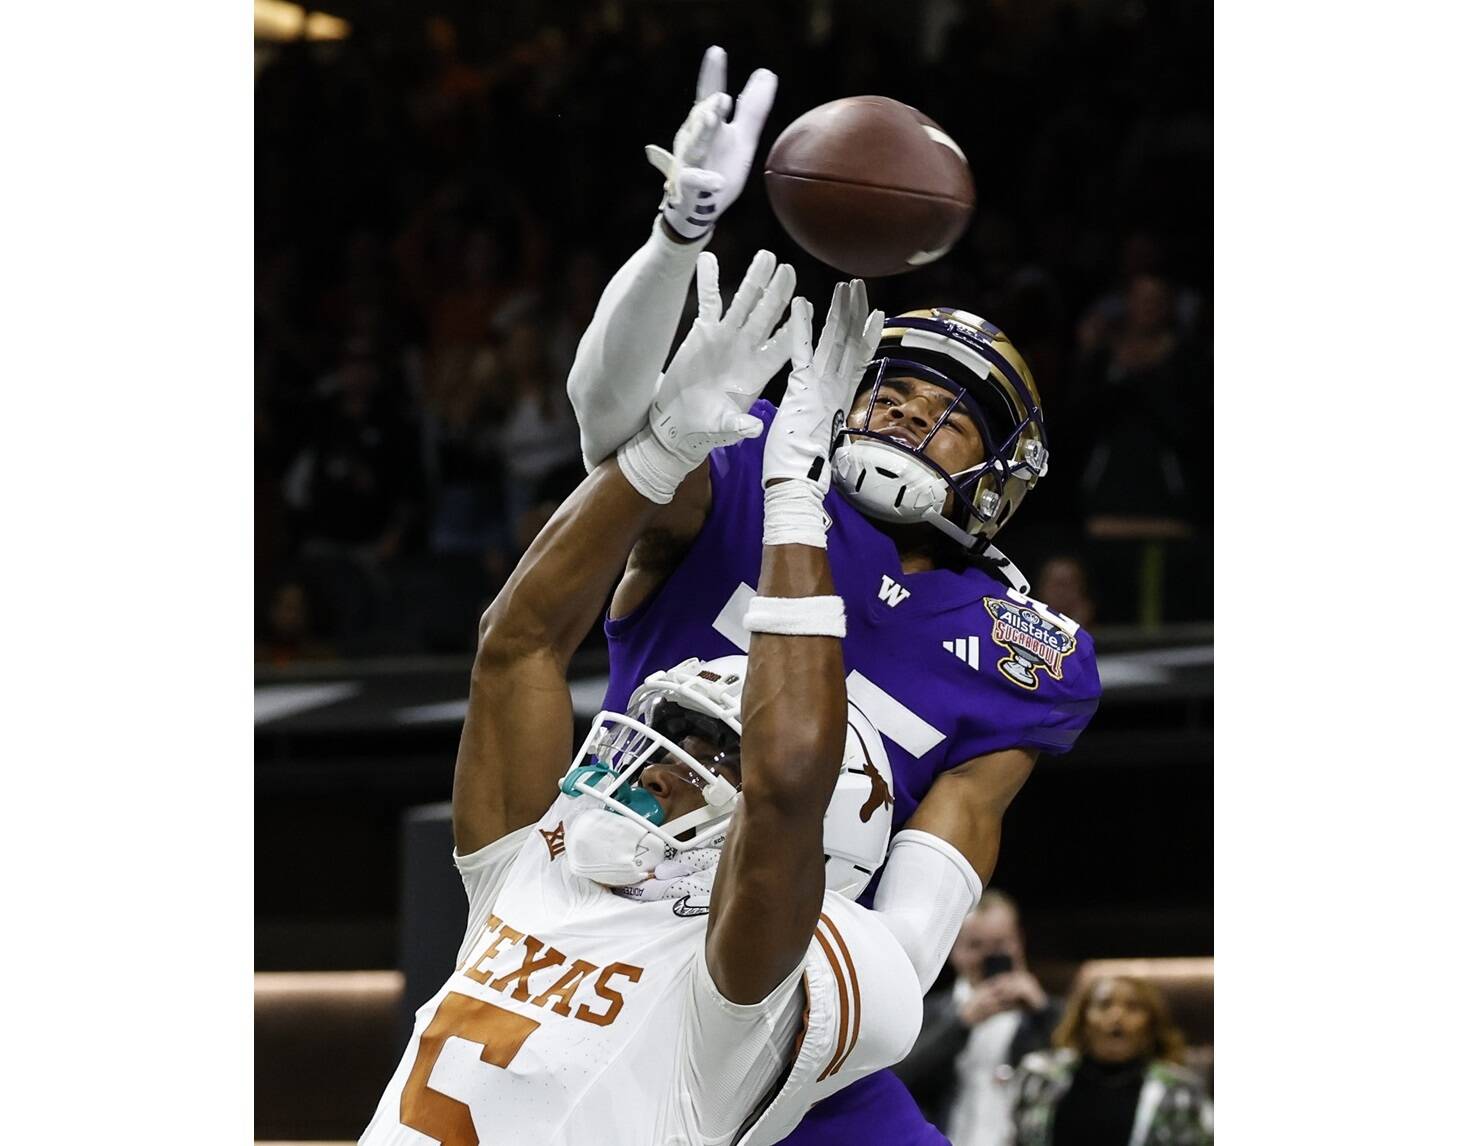 Washington cornerback Elijah Jackson (25) hits the ball before Texas wide receiver Adonai Mitchell (5) can catch it on the final play of the Sugar Bowl CFP NCAA semifinal college football game between Washington and Texas on Monday in New Orleans. Washington won 37-31. (AP Photo/Butch Dill)